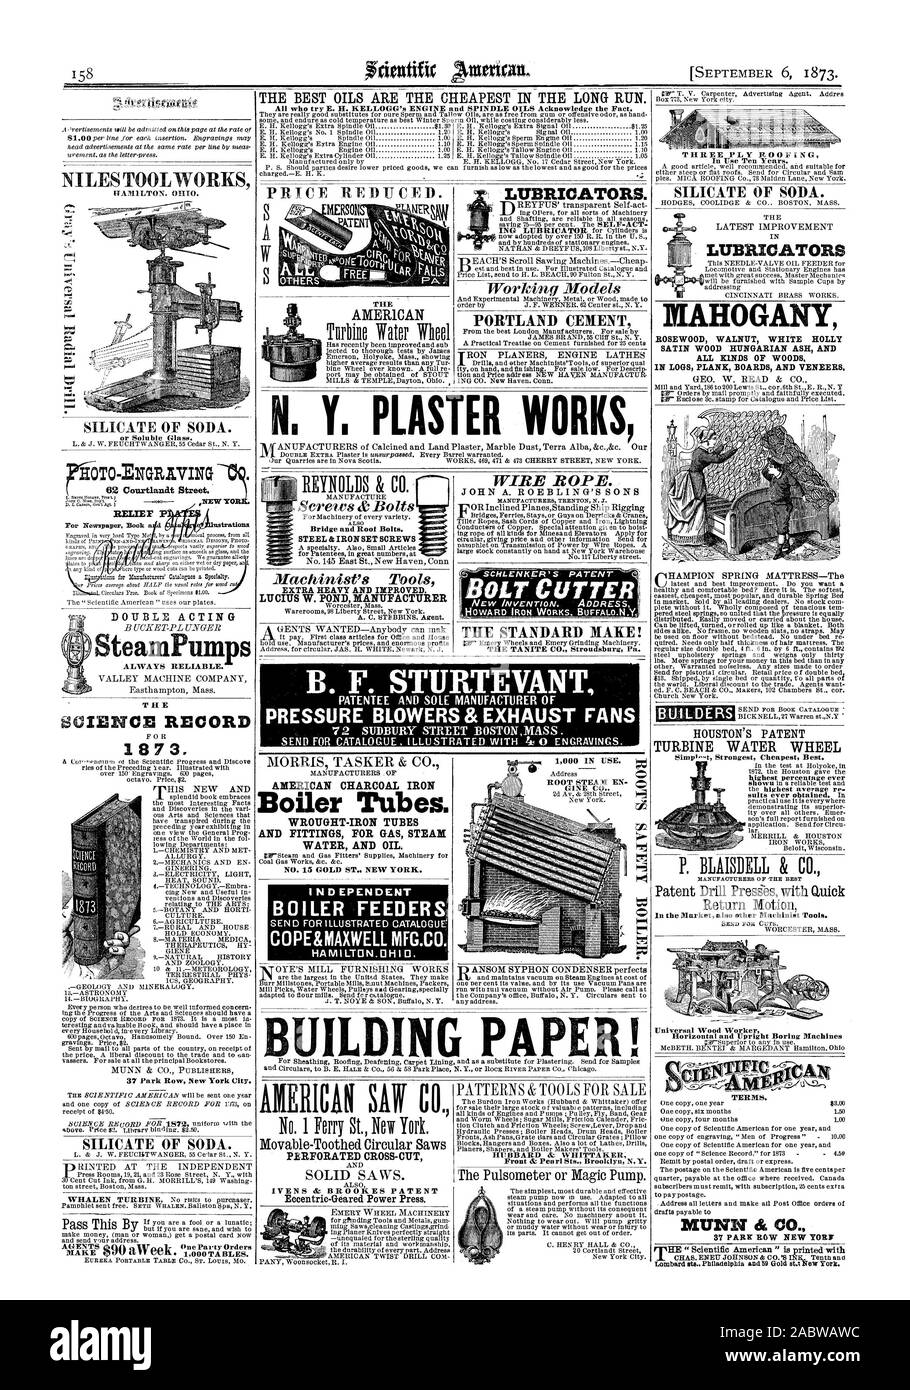 AMERICAN CHARCOAL IRON Boiler Tubes. WROUGHT-IRON TUBES AND FITTINGS FOR GAS STEAM WATER AND OIL NO. 15 GOLD ST NEW YORK. I ND EPEN DENT BOILER FEEDERS COPE&MAXWELL MFG.CO. HAMILTON.OH10. OYE'S MILL FURNISHING WORKS AIERICAR SAW CO. PERFORATED CROSS-CUT IVENS & BROISIES PATENT LUBRICATORS. PORTLAND CEMENT WIRE ROPE. JOHN A. ROEBLING'S SONS BOLT CUTTER THE TANITE CO. Stroudsburg Pa. HUBBARD & WHITTAKER Front Az Pearl Ste. Brooklyn N.Y. LATEST IMPROVEMENT IN LUBRICATORS MAHOGANY ROSEWOOD WALNUT WHITE HOLLY SATIN WOOD HUNGARIAN ASH AND ALL KINDS OF WOODS IN LOGS PLANK BOARDS AND VENEERS. GEO. W Stock Photo